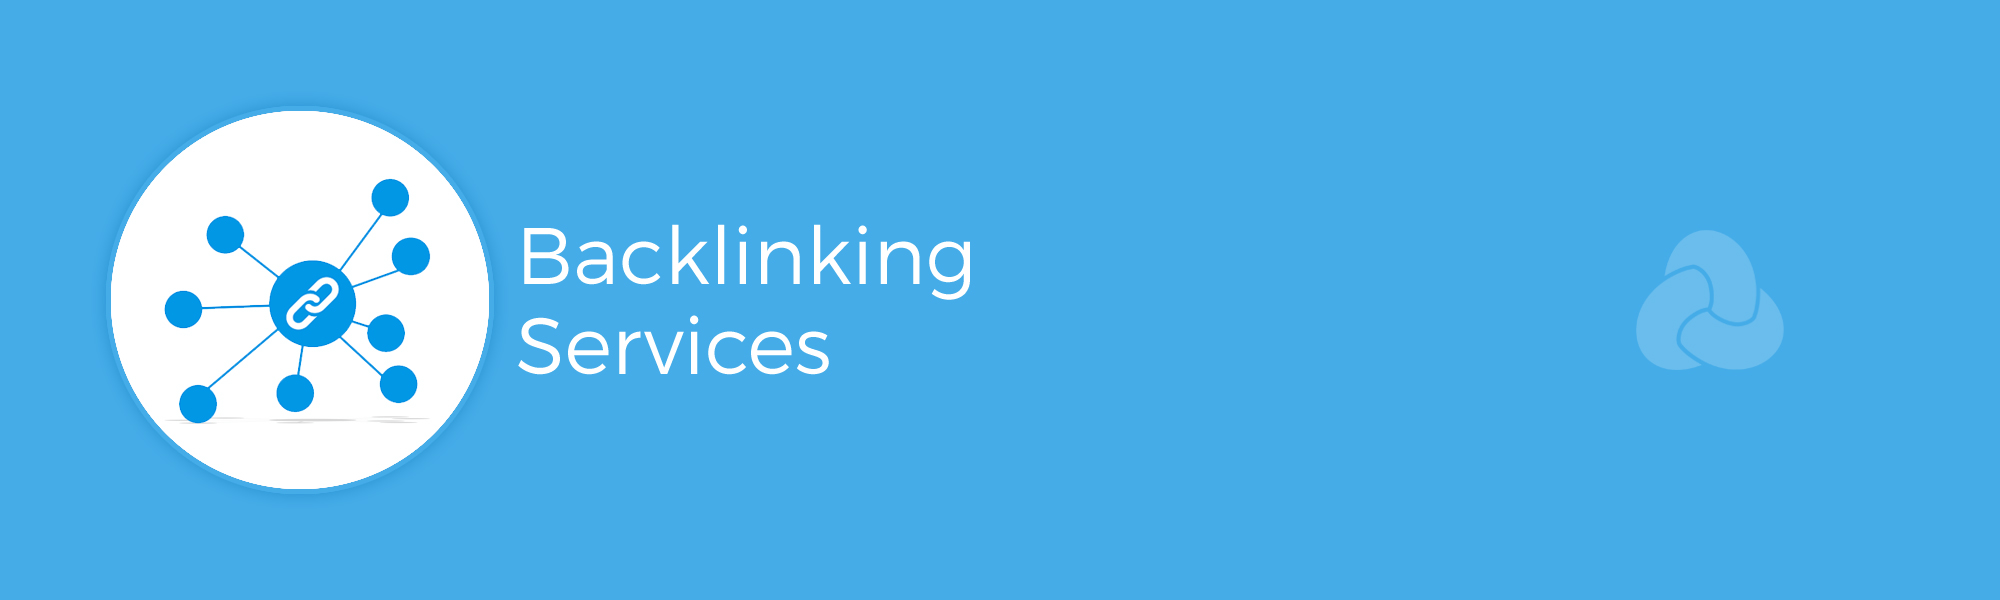 backlinking services